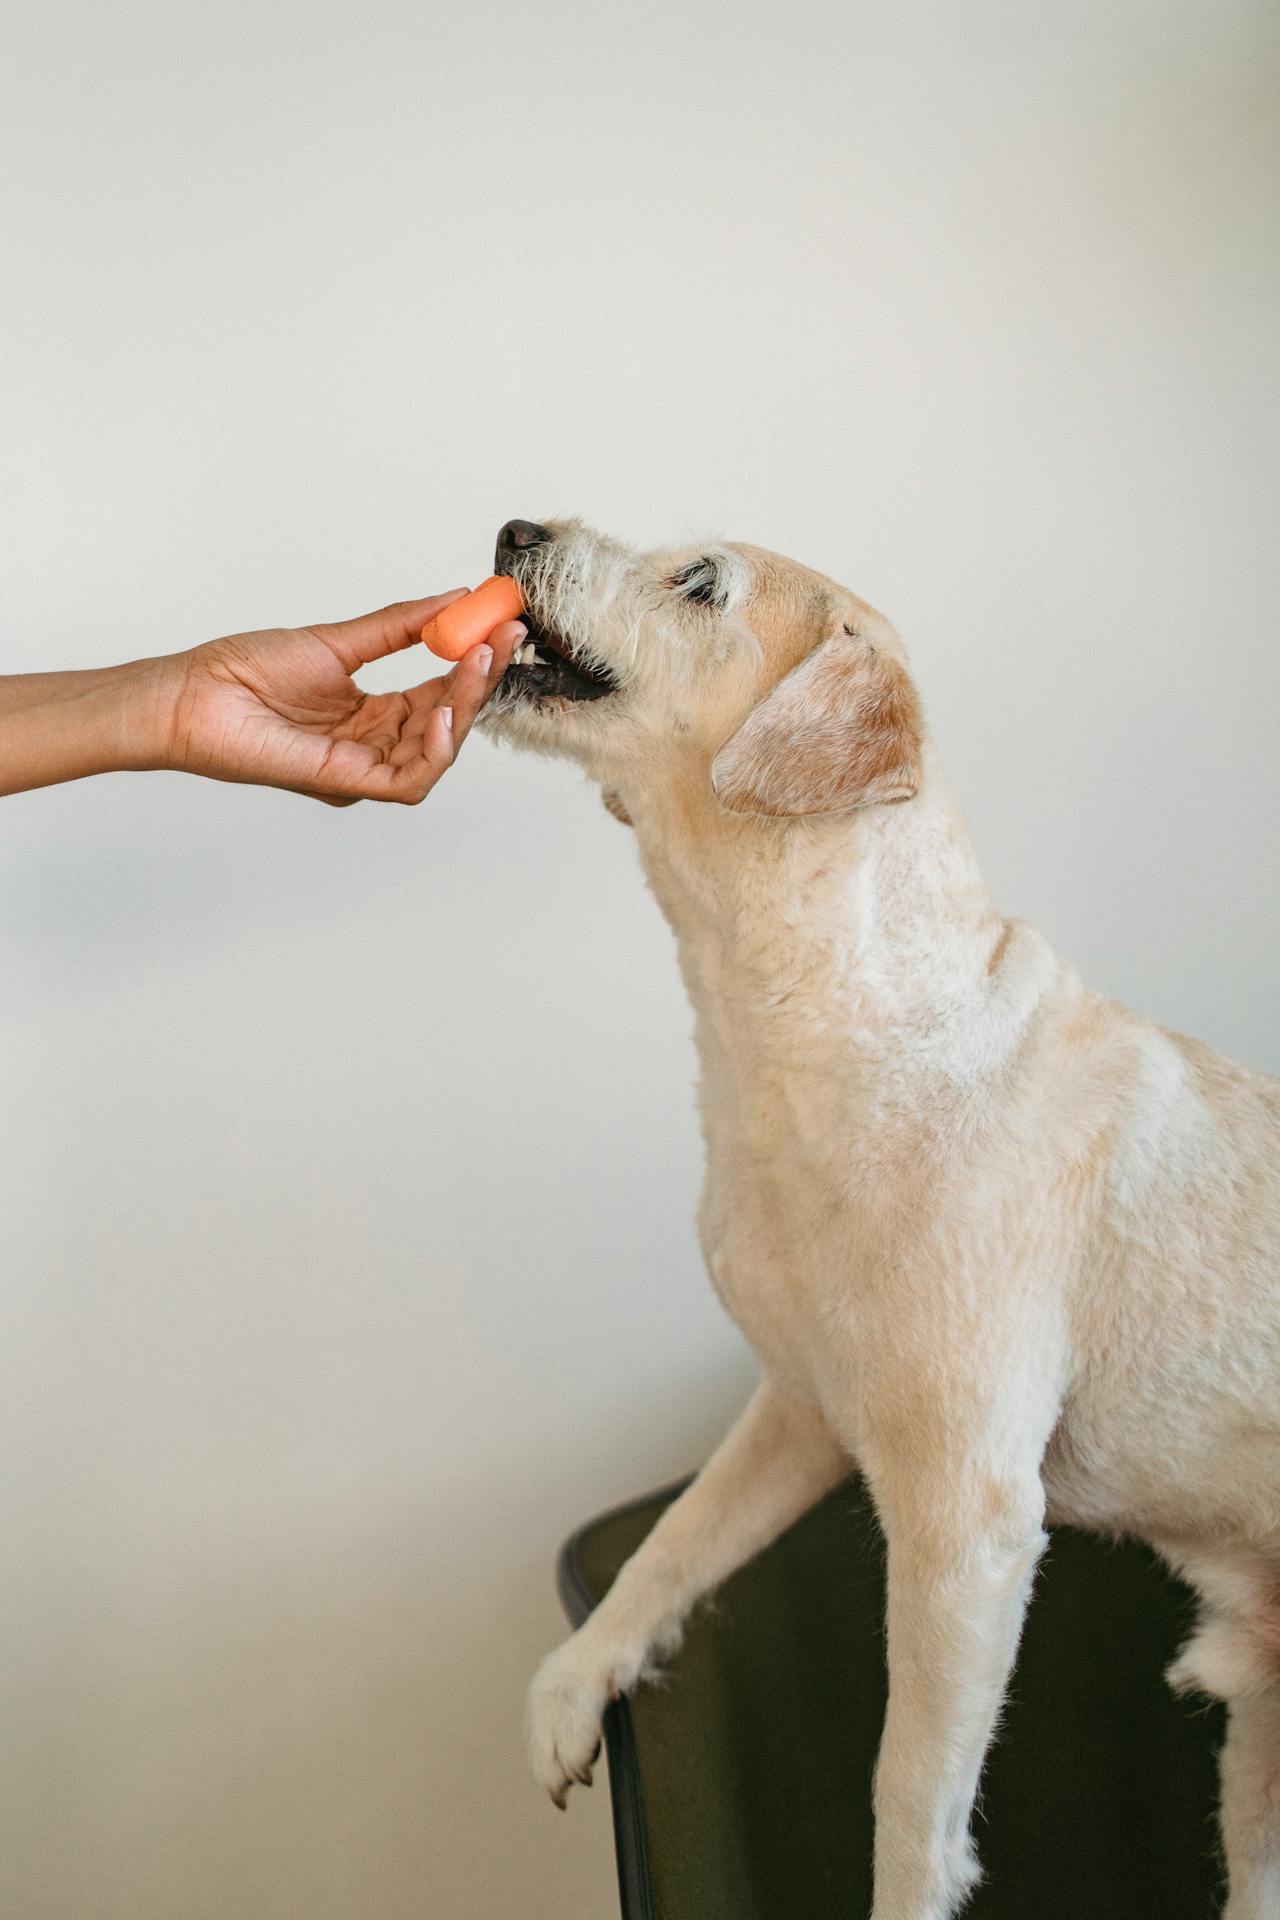 Dog Eating Food Article